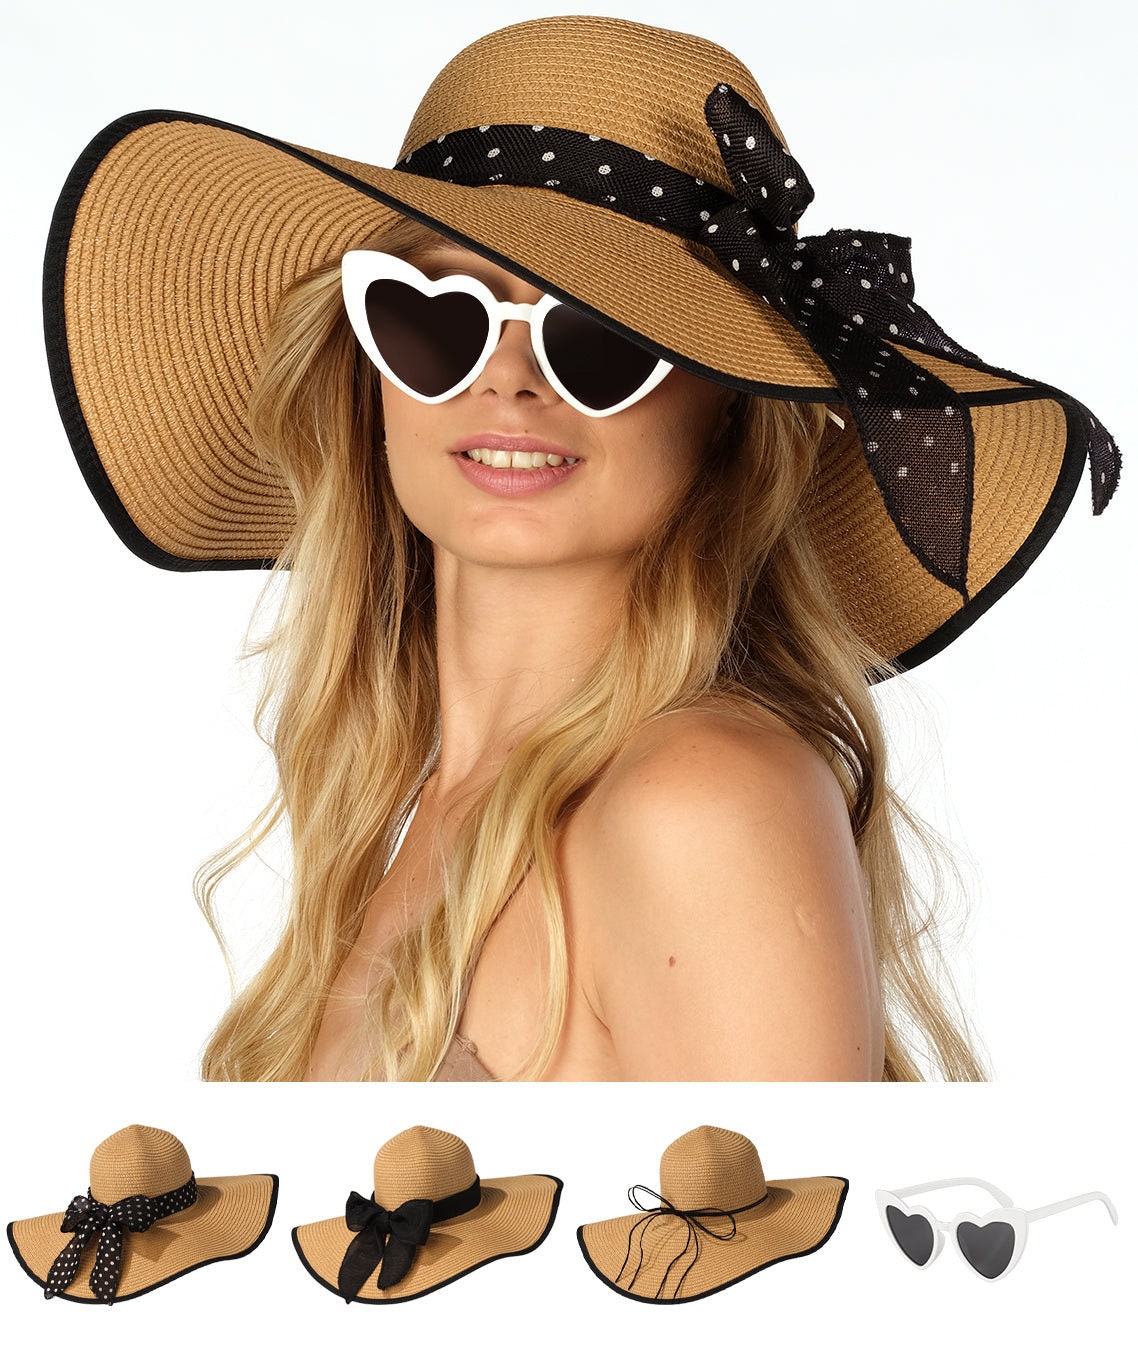 Funcredible Wide Brim Sun Hats for Women Floppy Straw Hat With